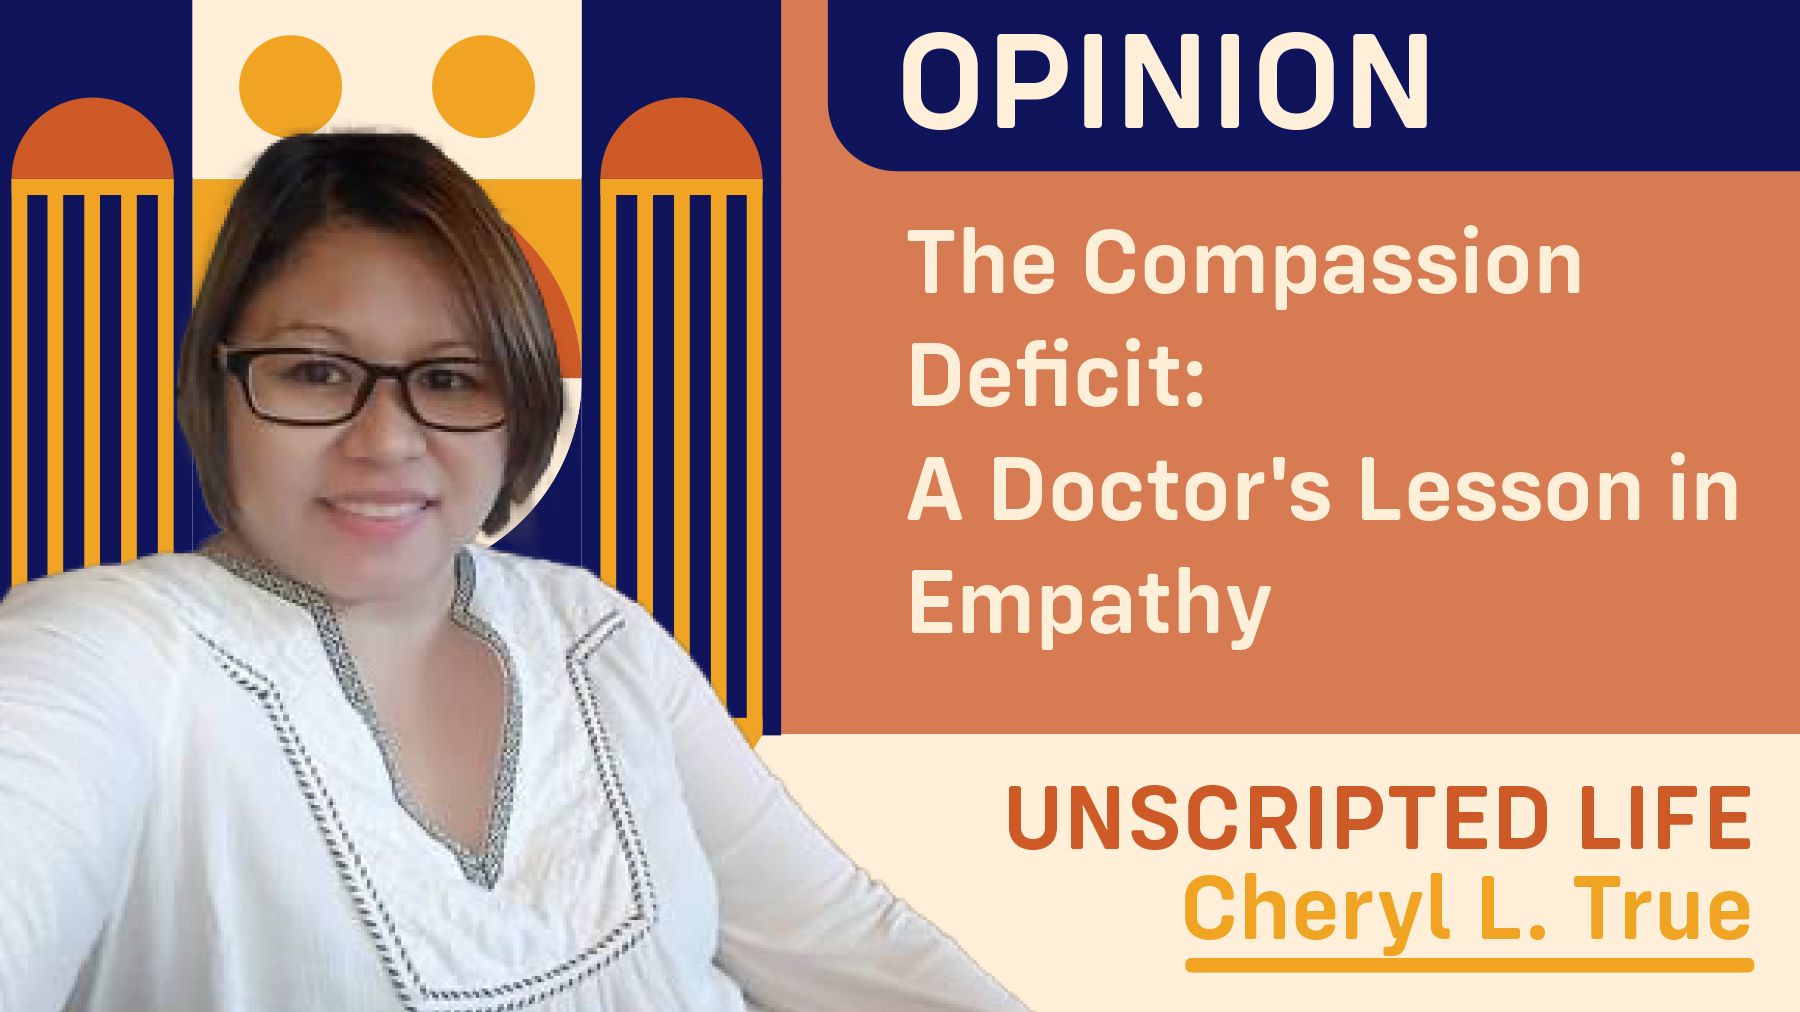 The Compassion Deficit: A Doctor's Lesson in Empathy